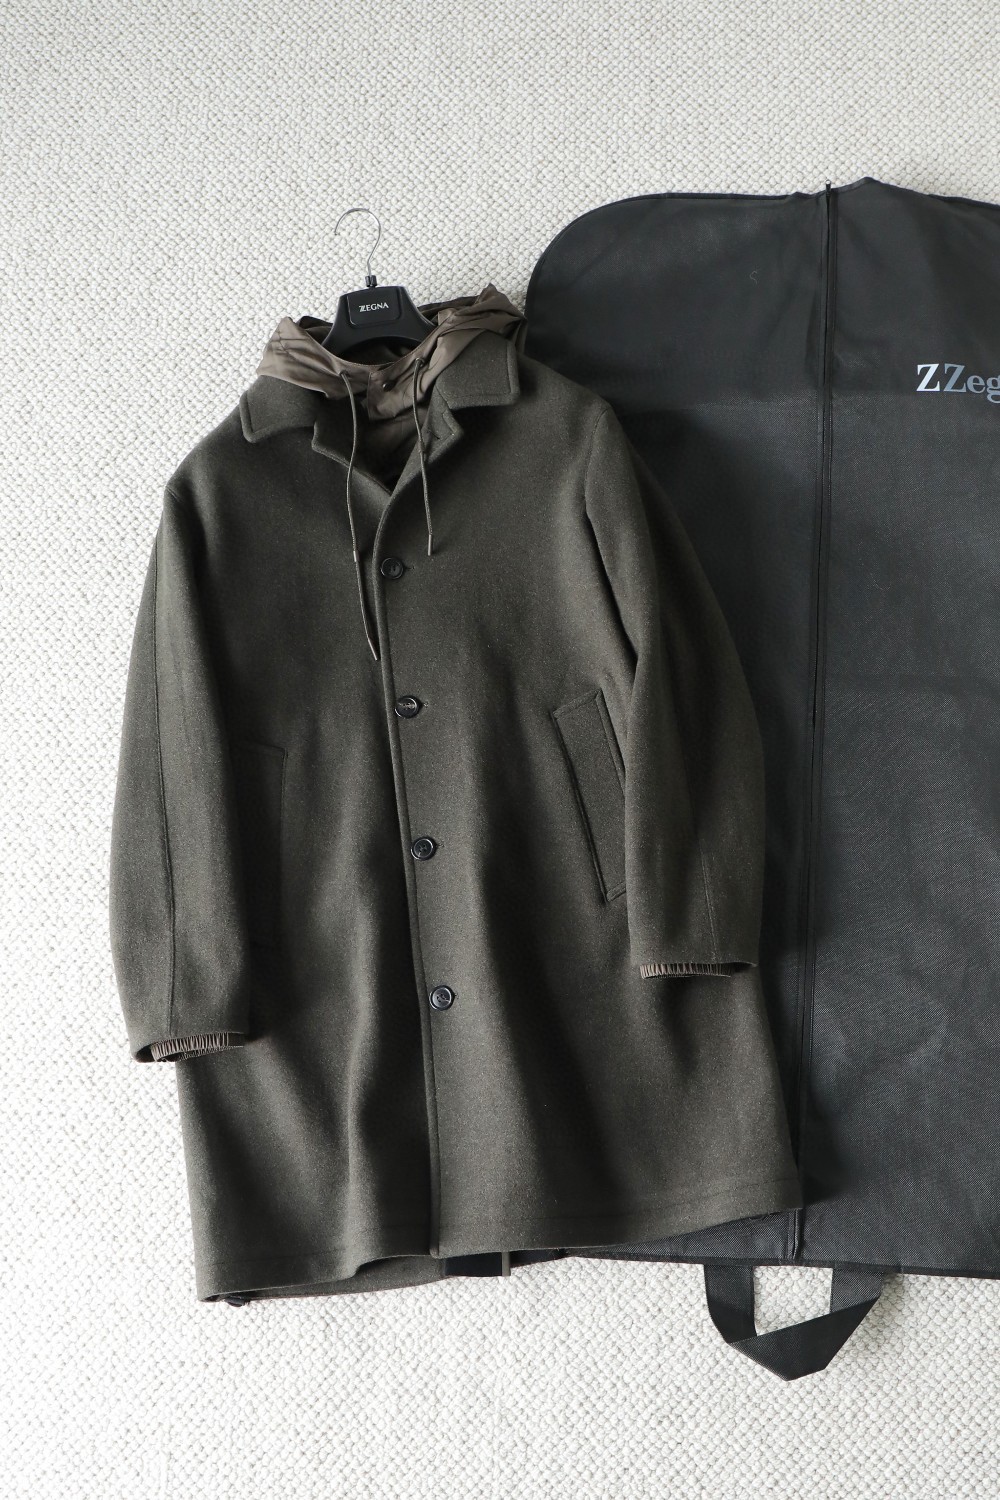 Zegna Clothing Coats & Jackets Windbreaker Men Cashmere Wool Winter Collection Hooded Top